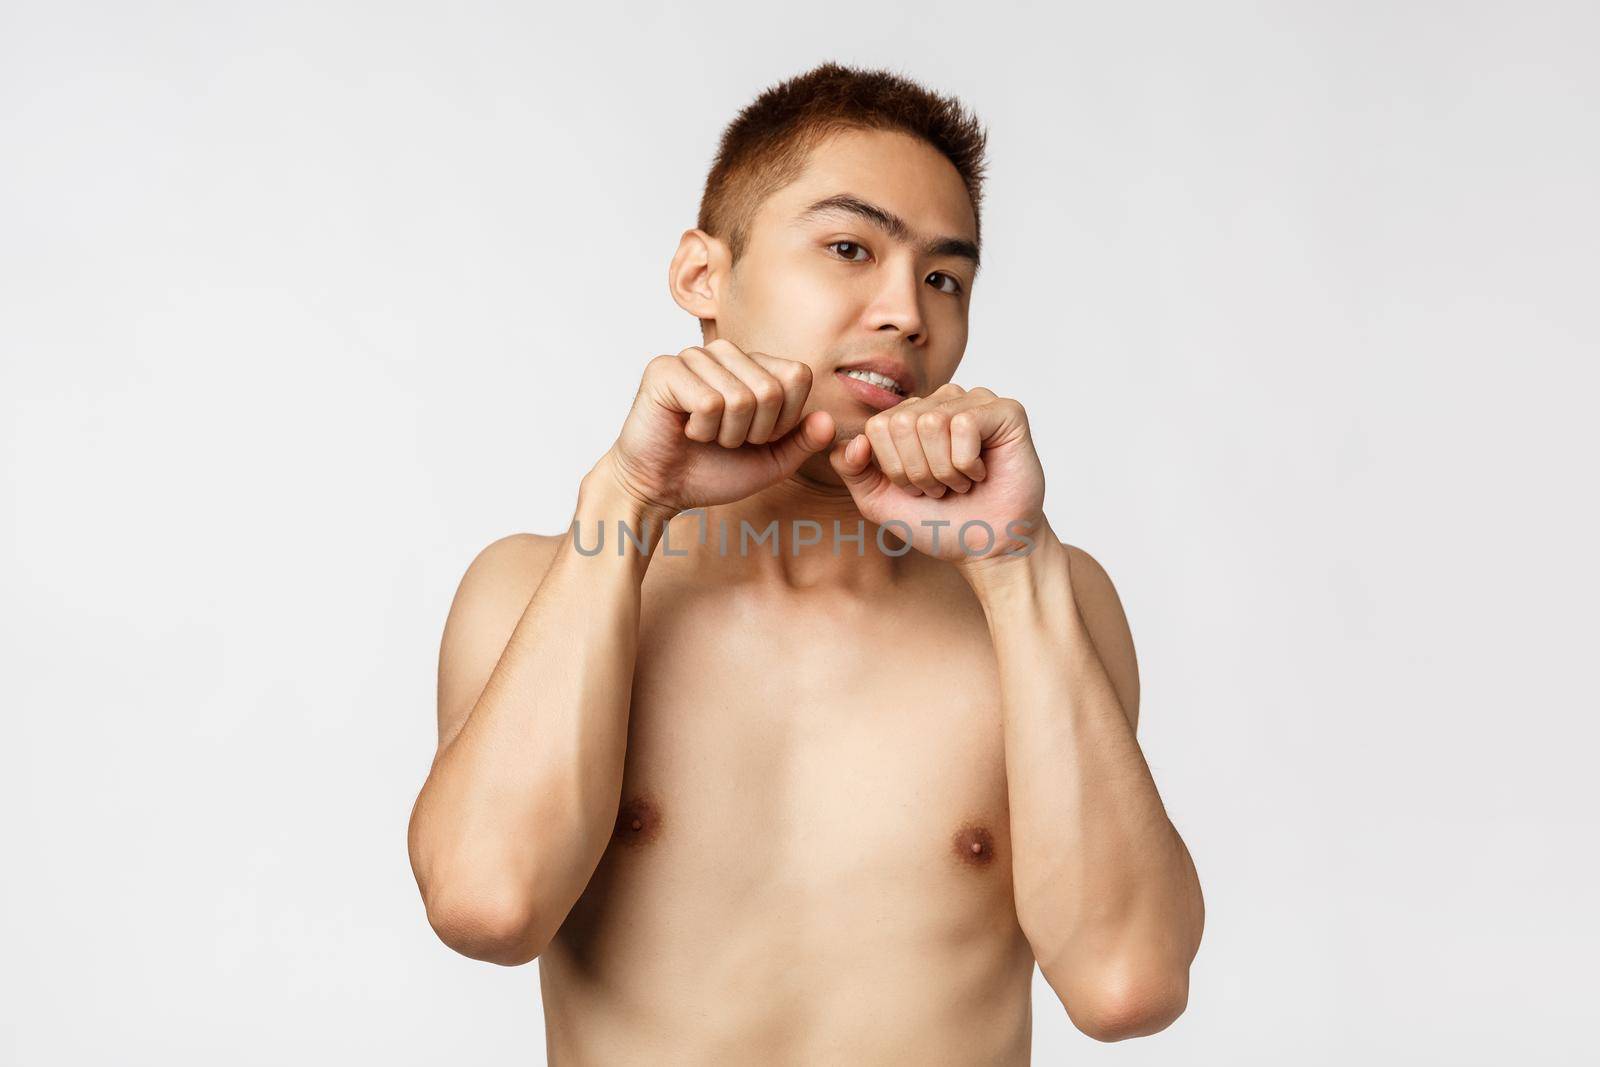 Beauty, people and home concept. Cute asian man with naked torso acting like kitten, making nya kawaii gesture imitating paws, look camera upbeat, standing white background.